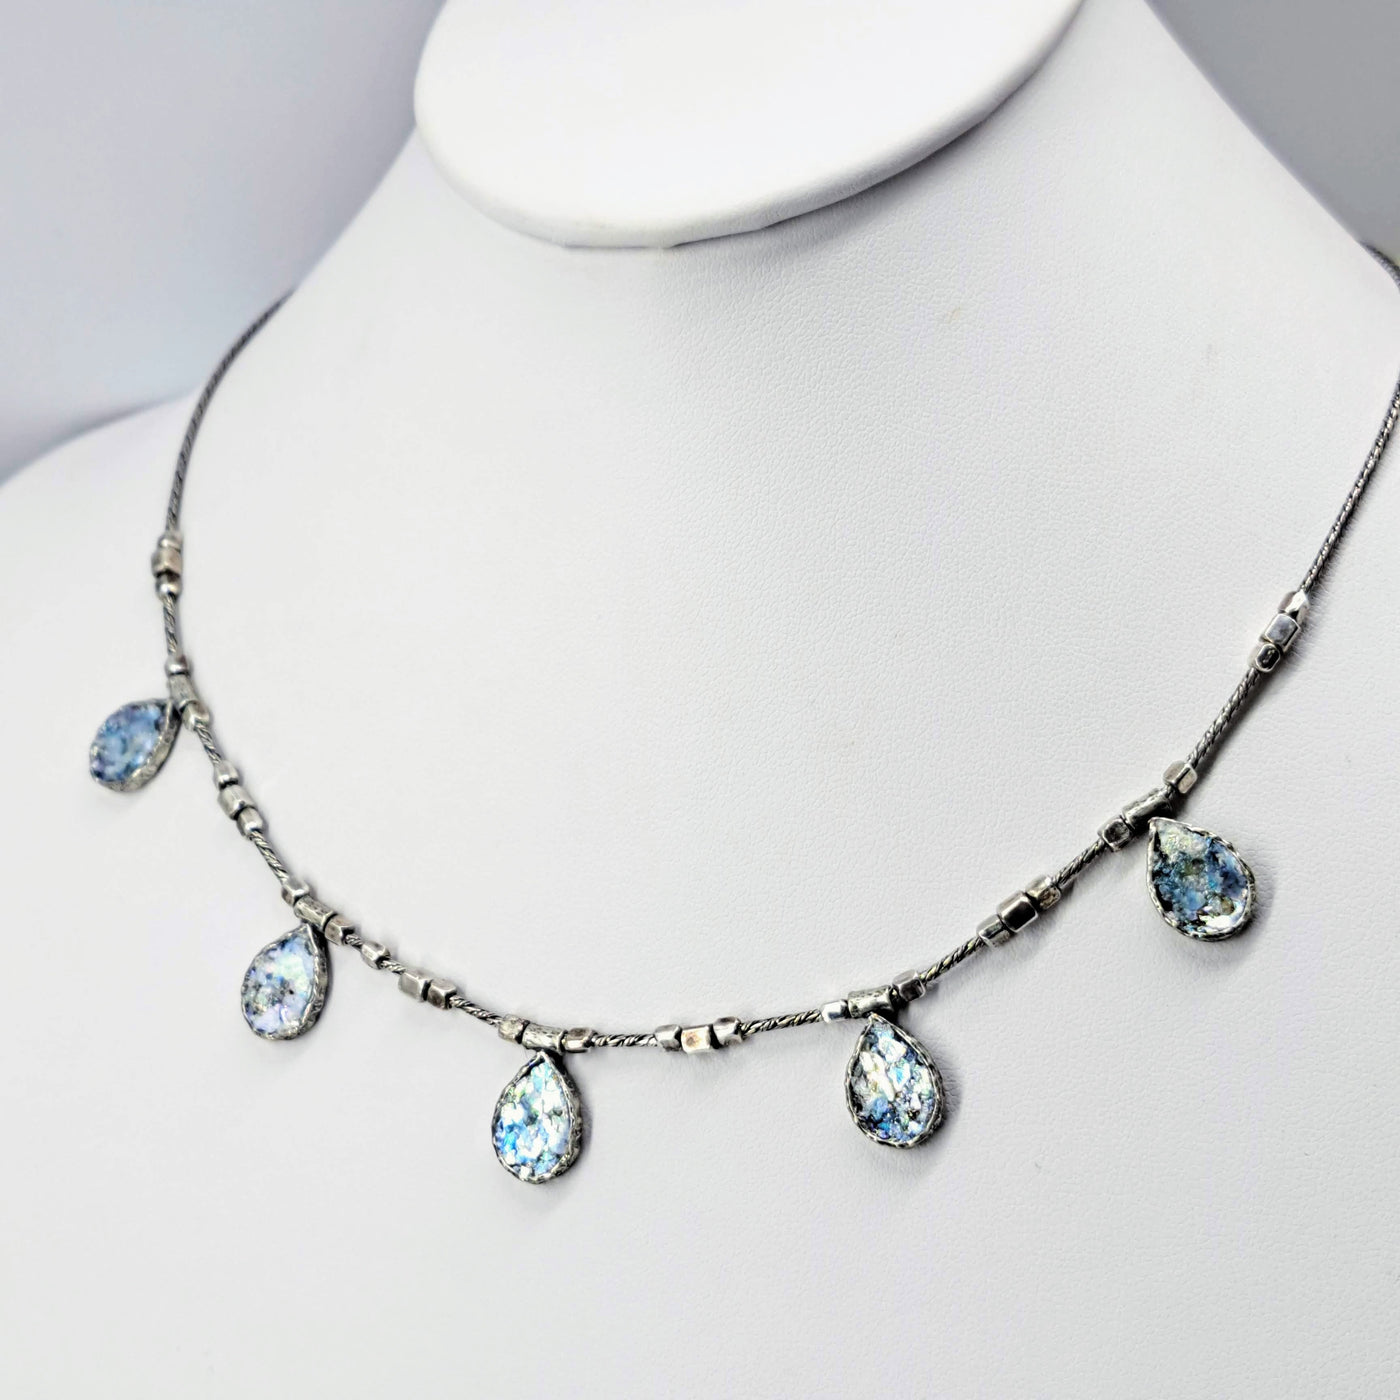 "Ancient Beauty" 18" Necklace - Ancient Roman Glass, Sterling